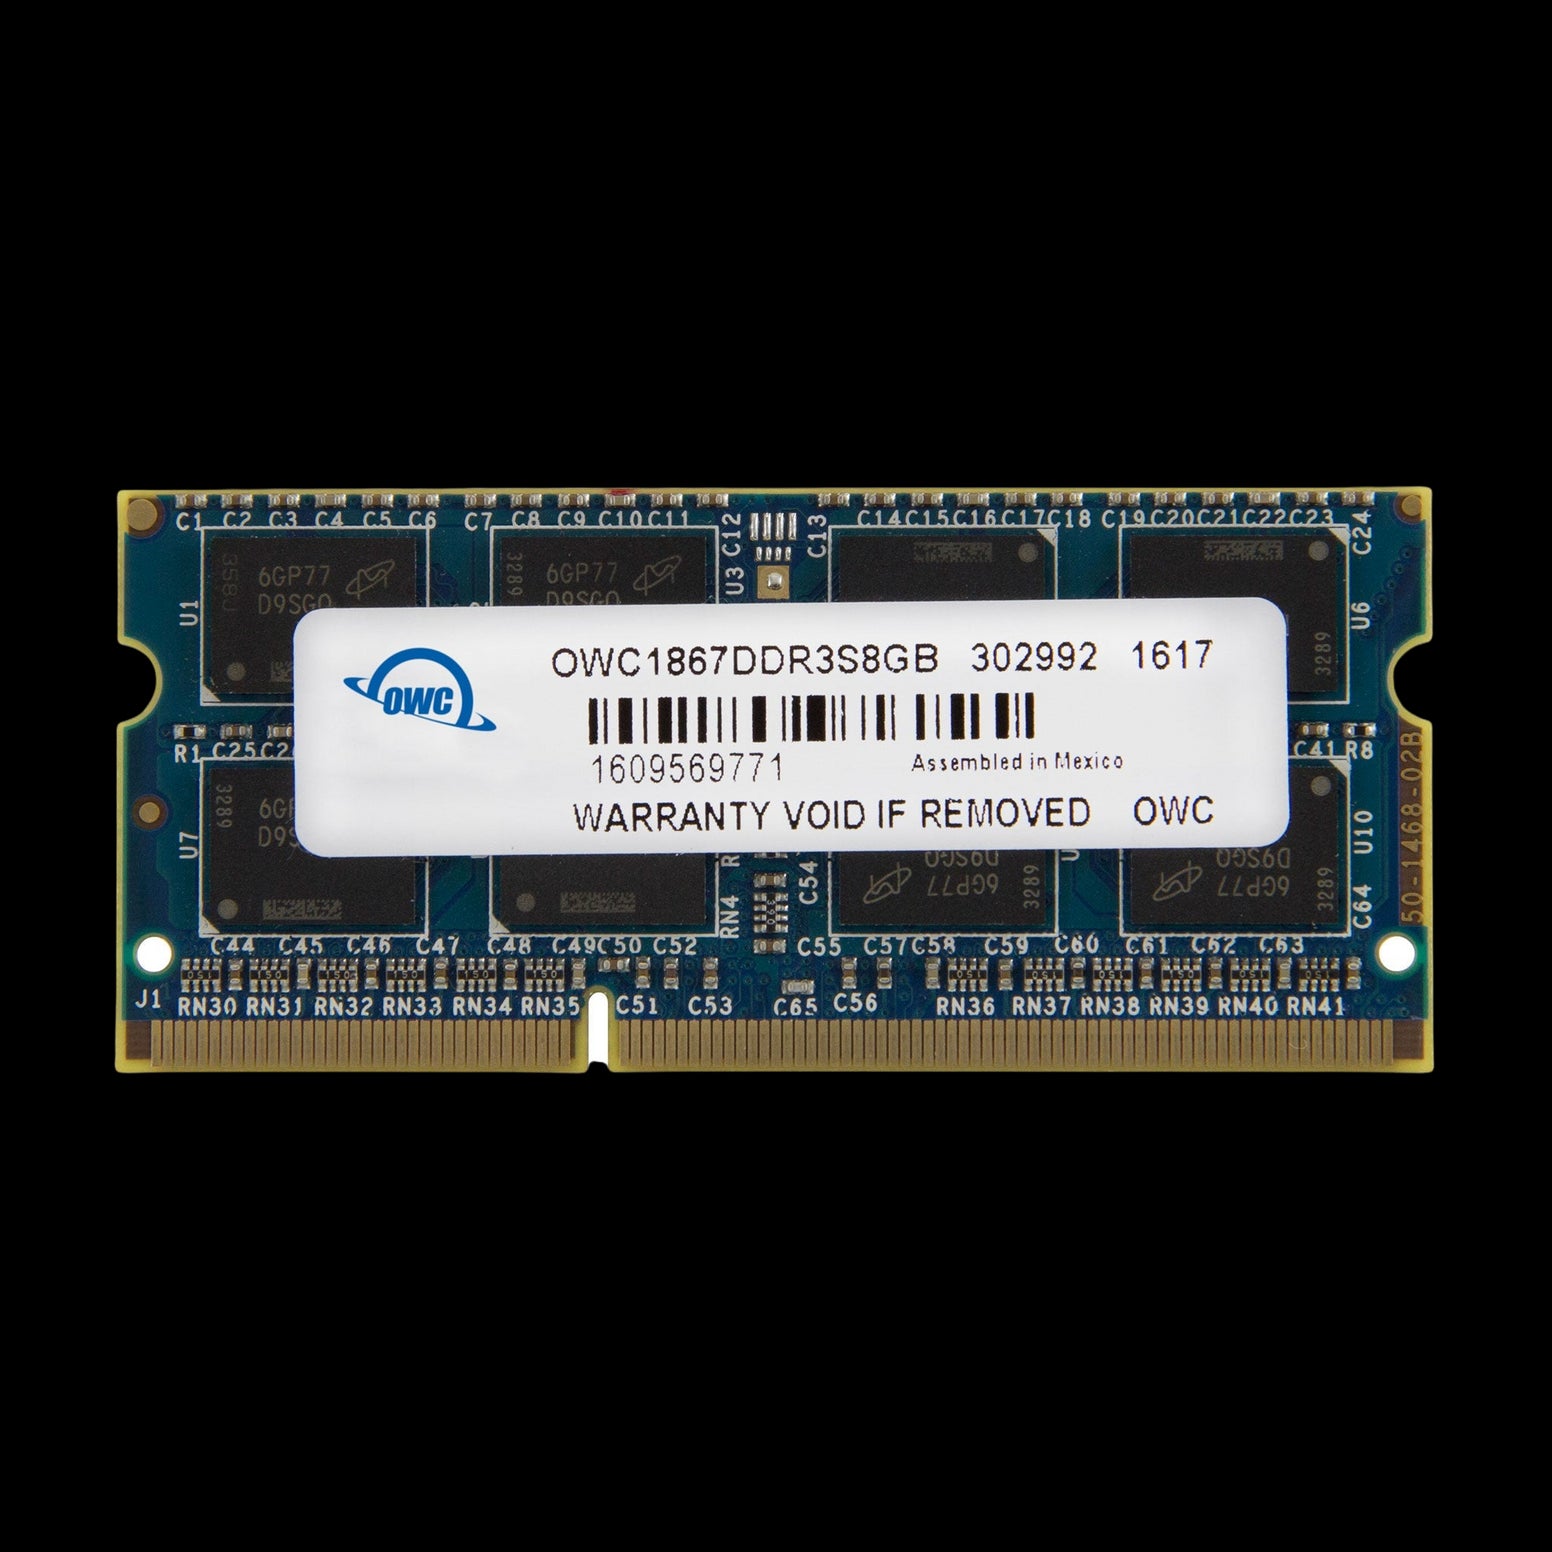 4GB OWC Memory Upgrade Kit 1867MHZ PC3-14900 DDR3 SO-DIMM